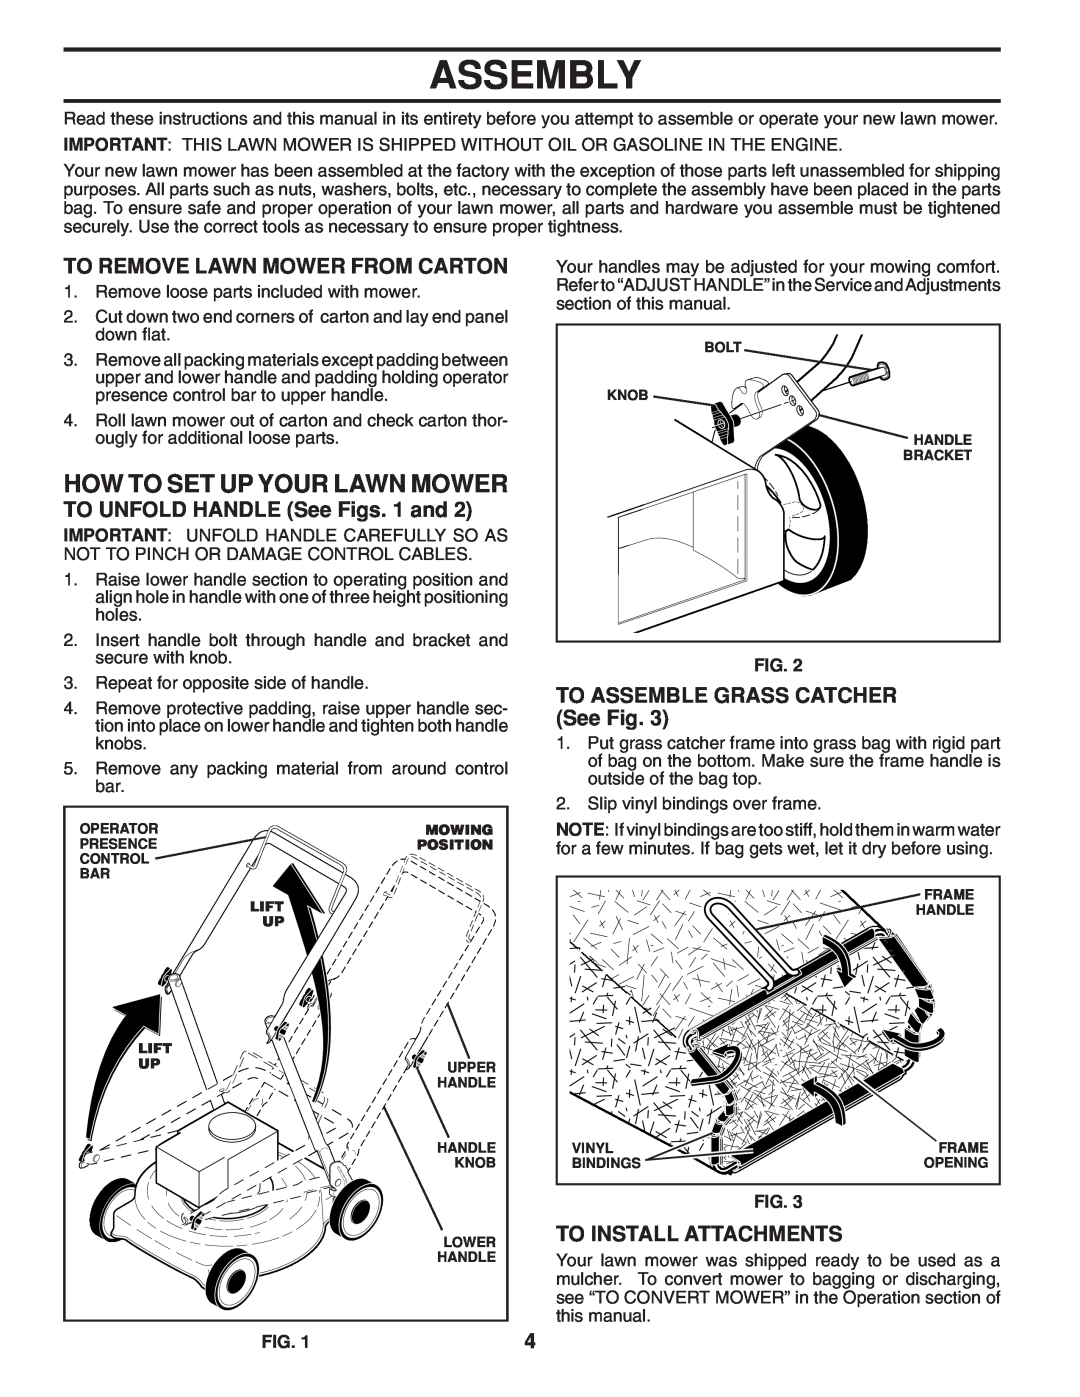 Husqvarna 961430097 Assembly, How To Set Up Your Lawn Mower, To Remove Lawn Mower From Carton, To Install Attachments 